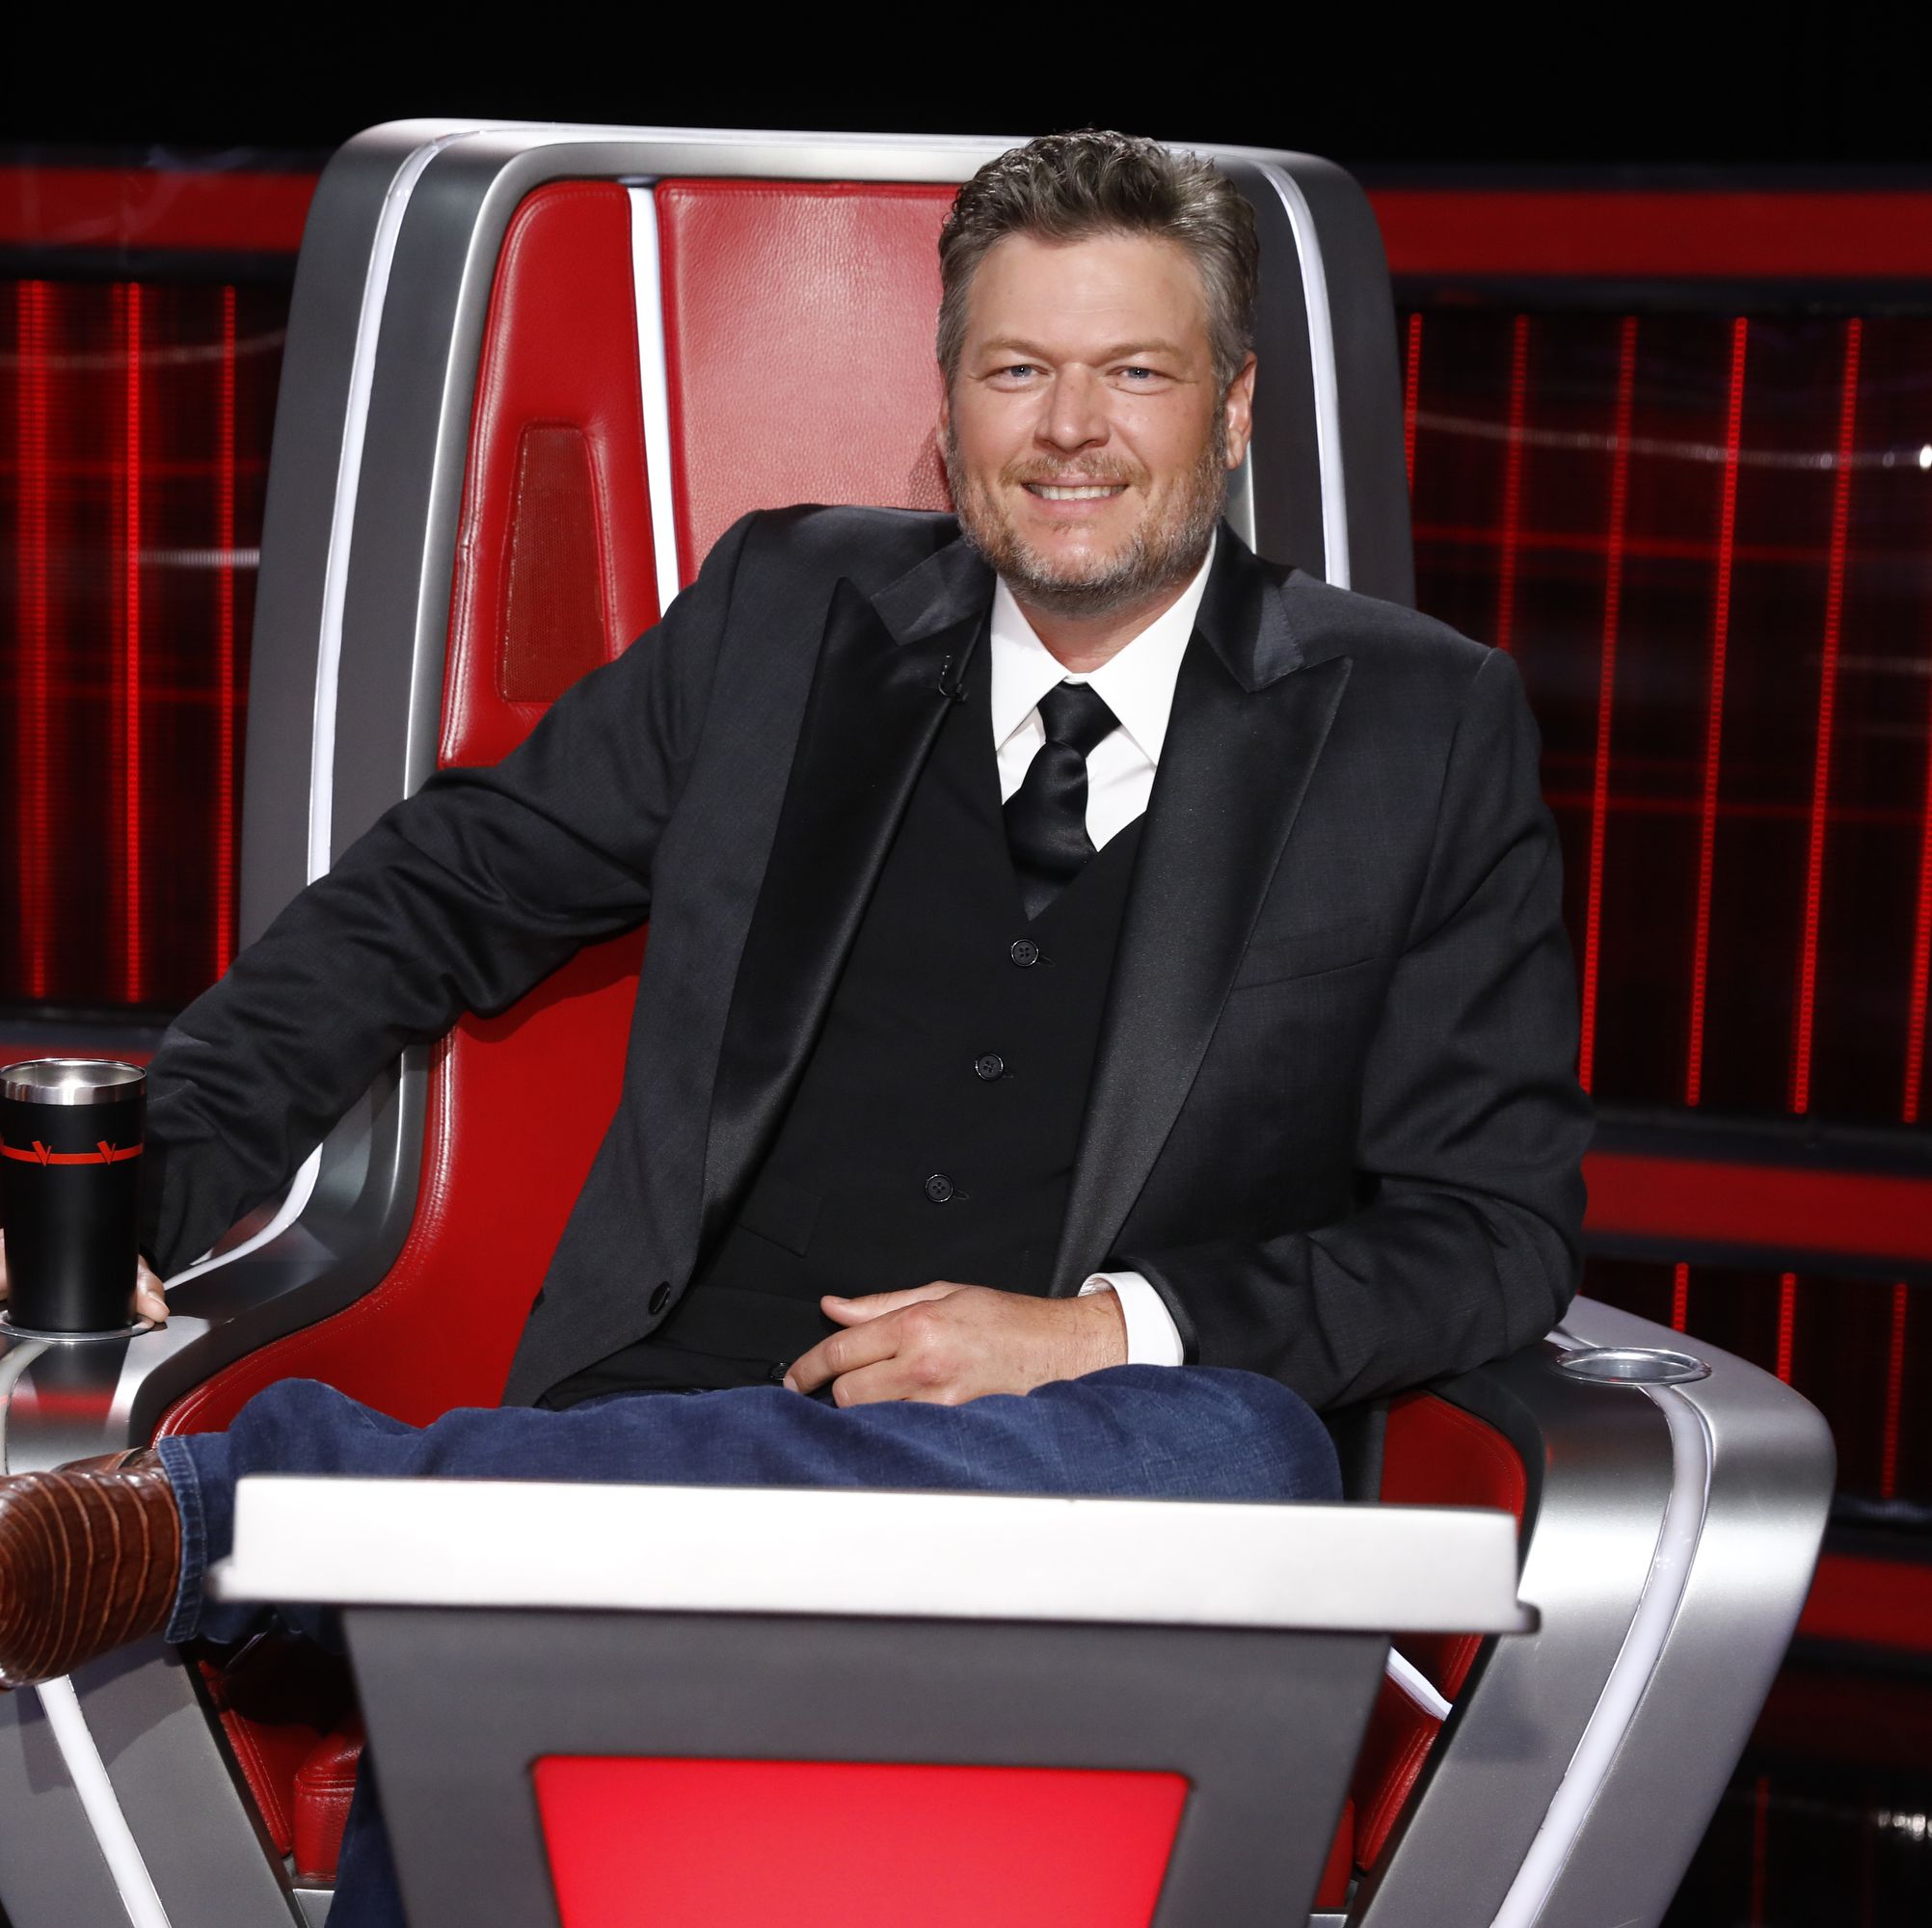 Blake Shelton Is Leaving 'The Voice' After Season 23—Read His Statement!